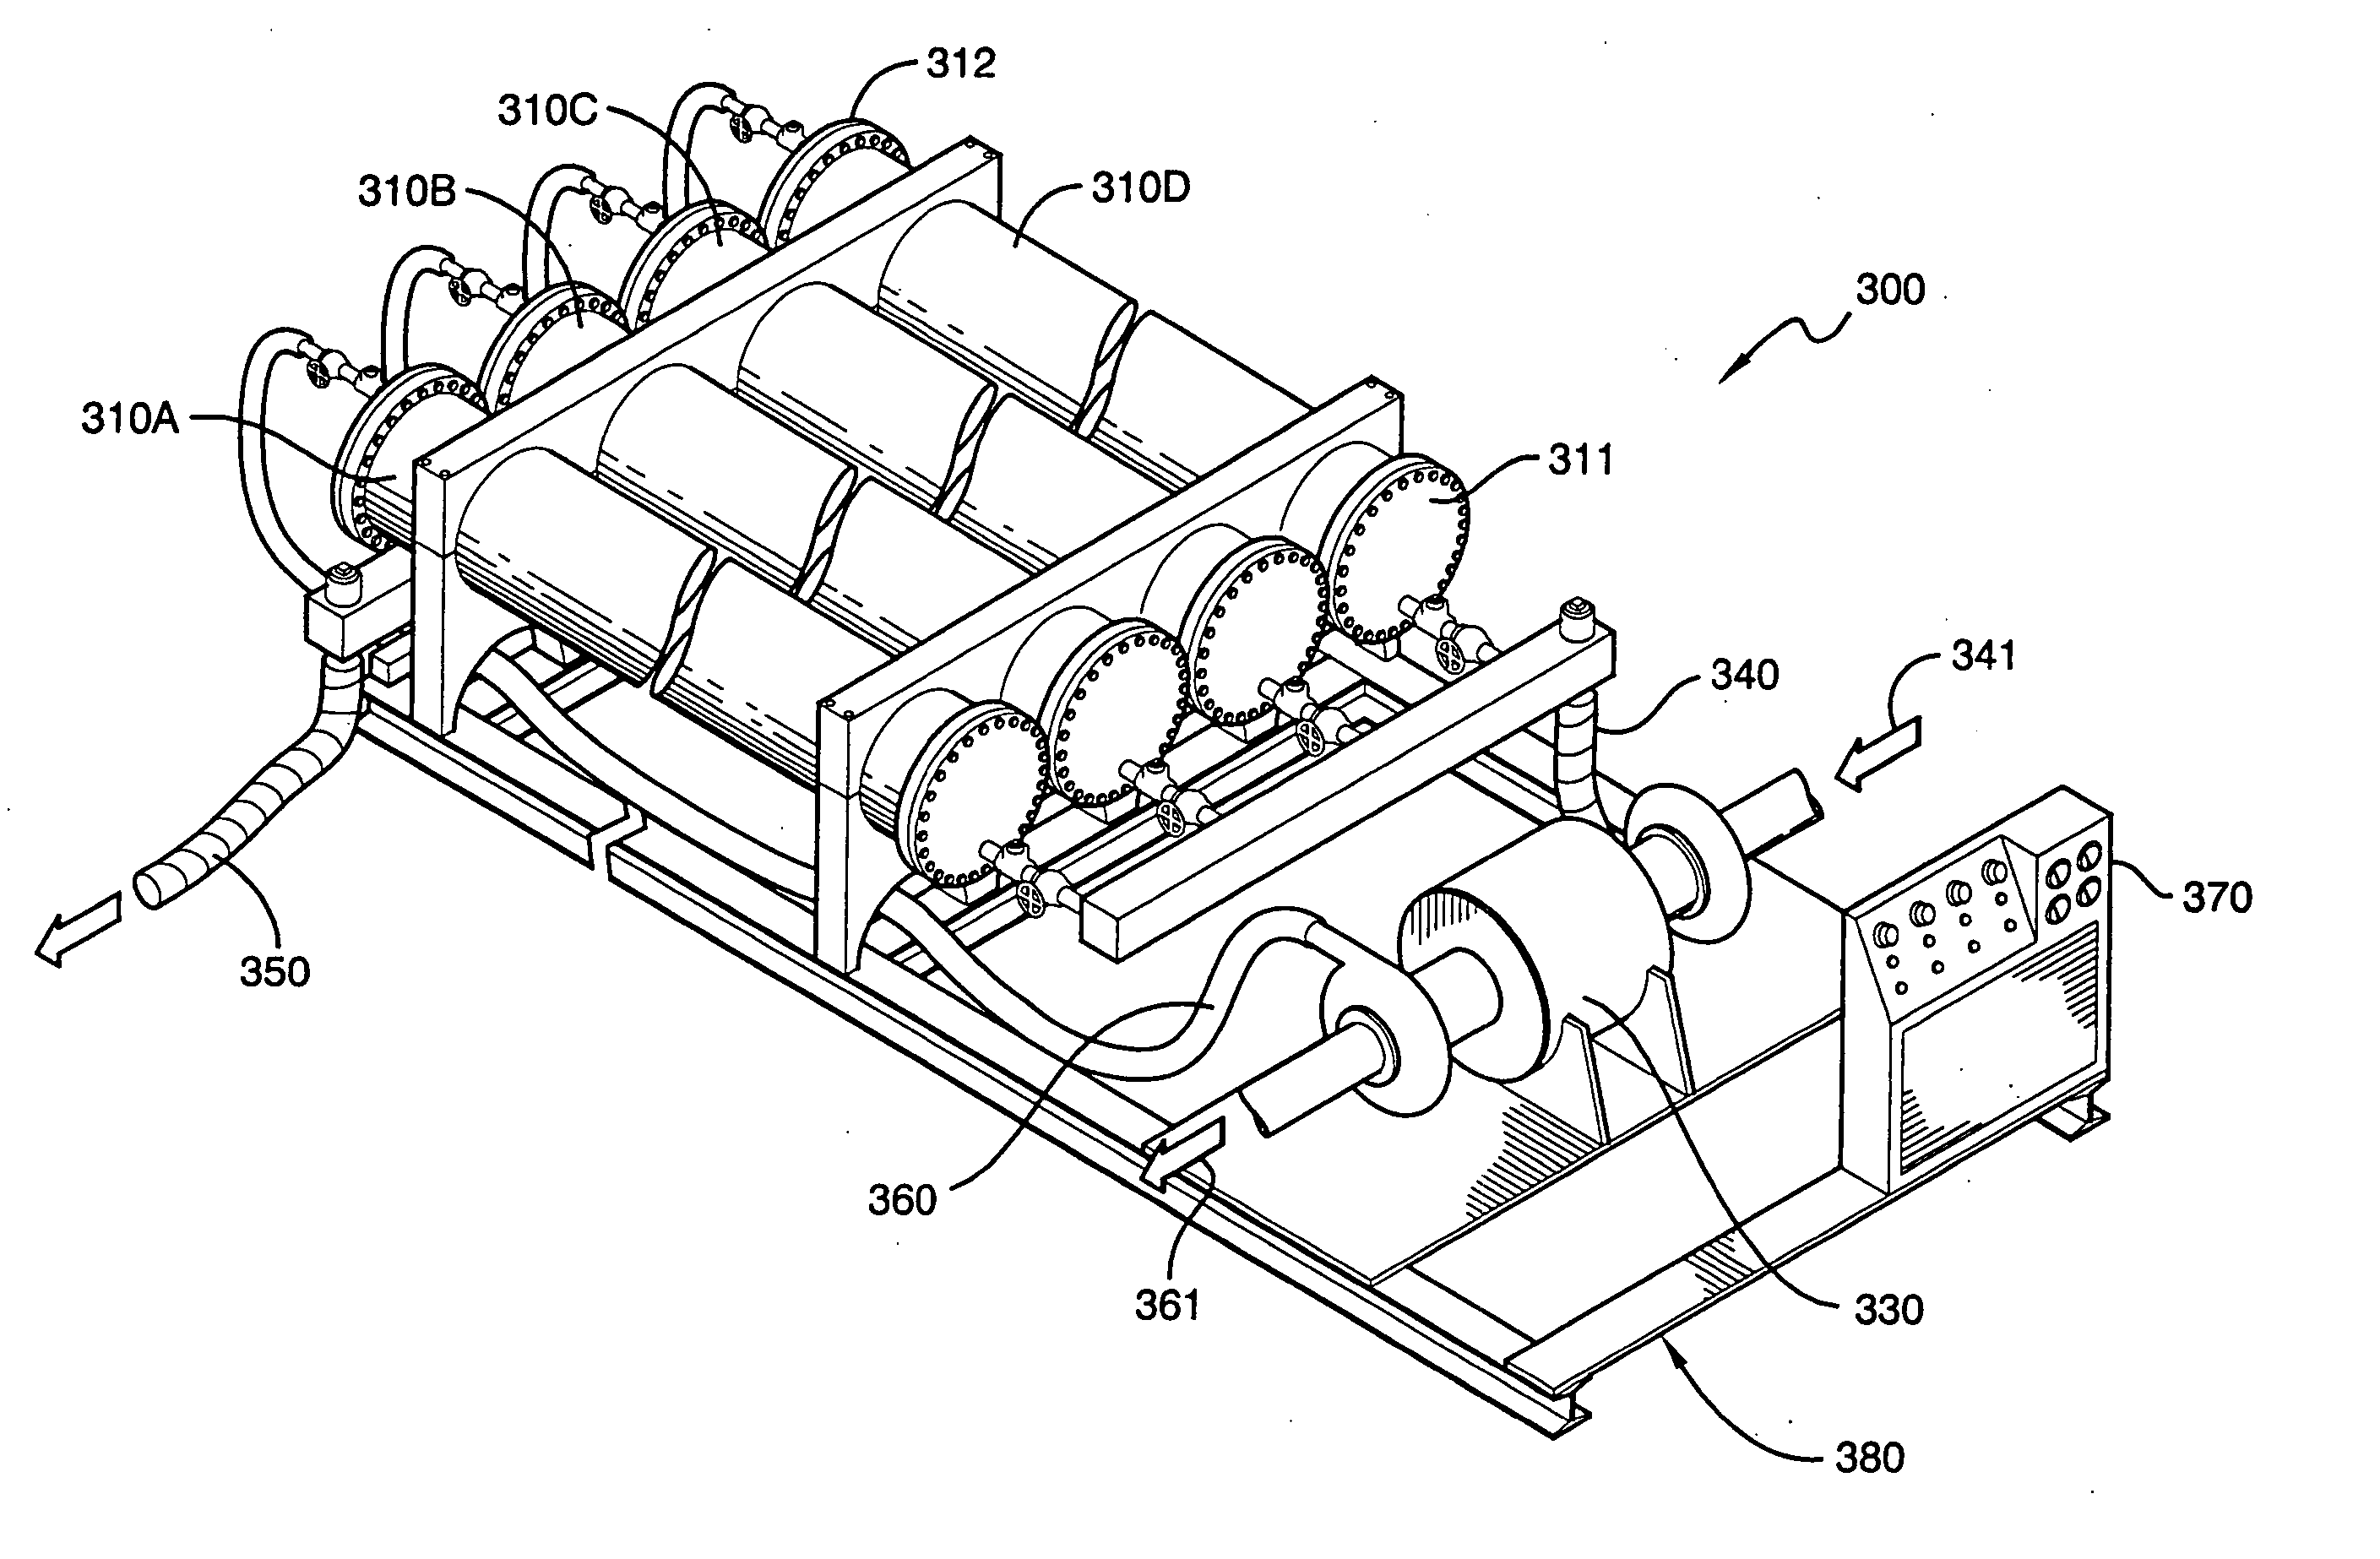 Filtration system with anti-telescoping device